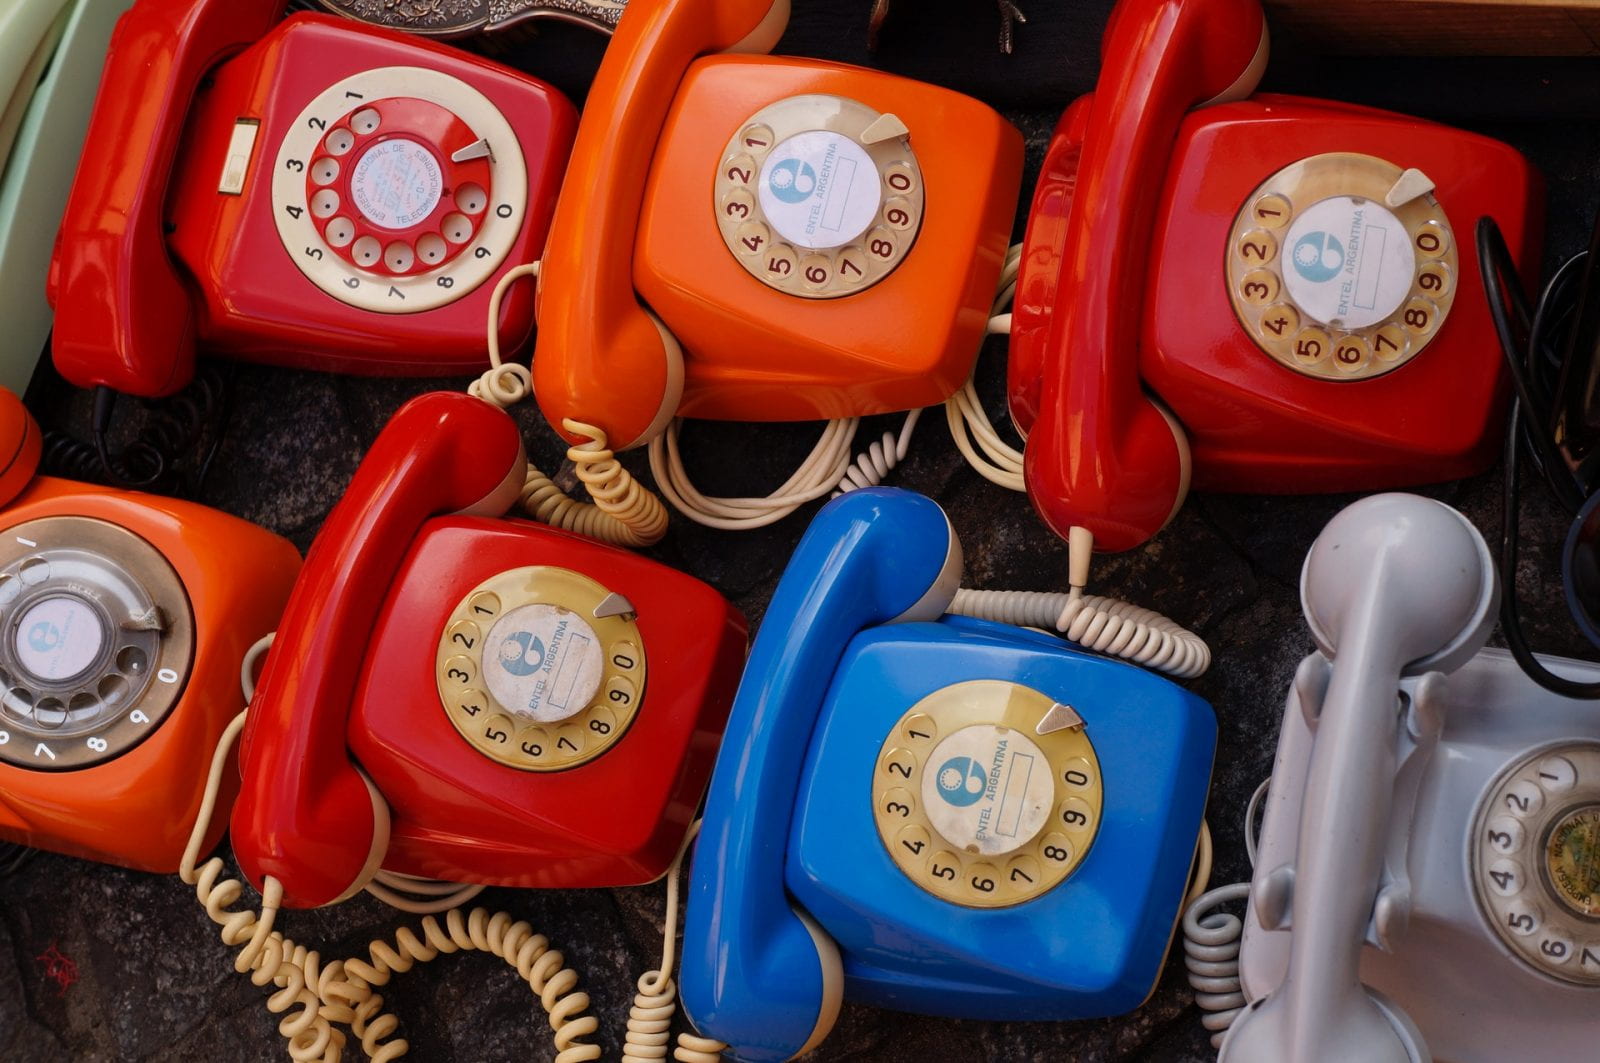 multiple brightly colored rotary-dial phones